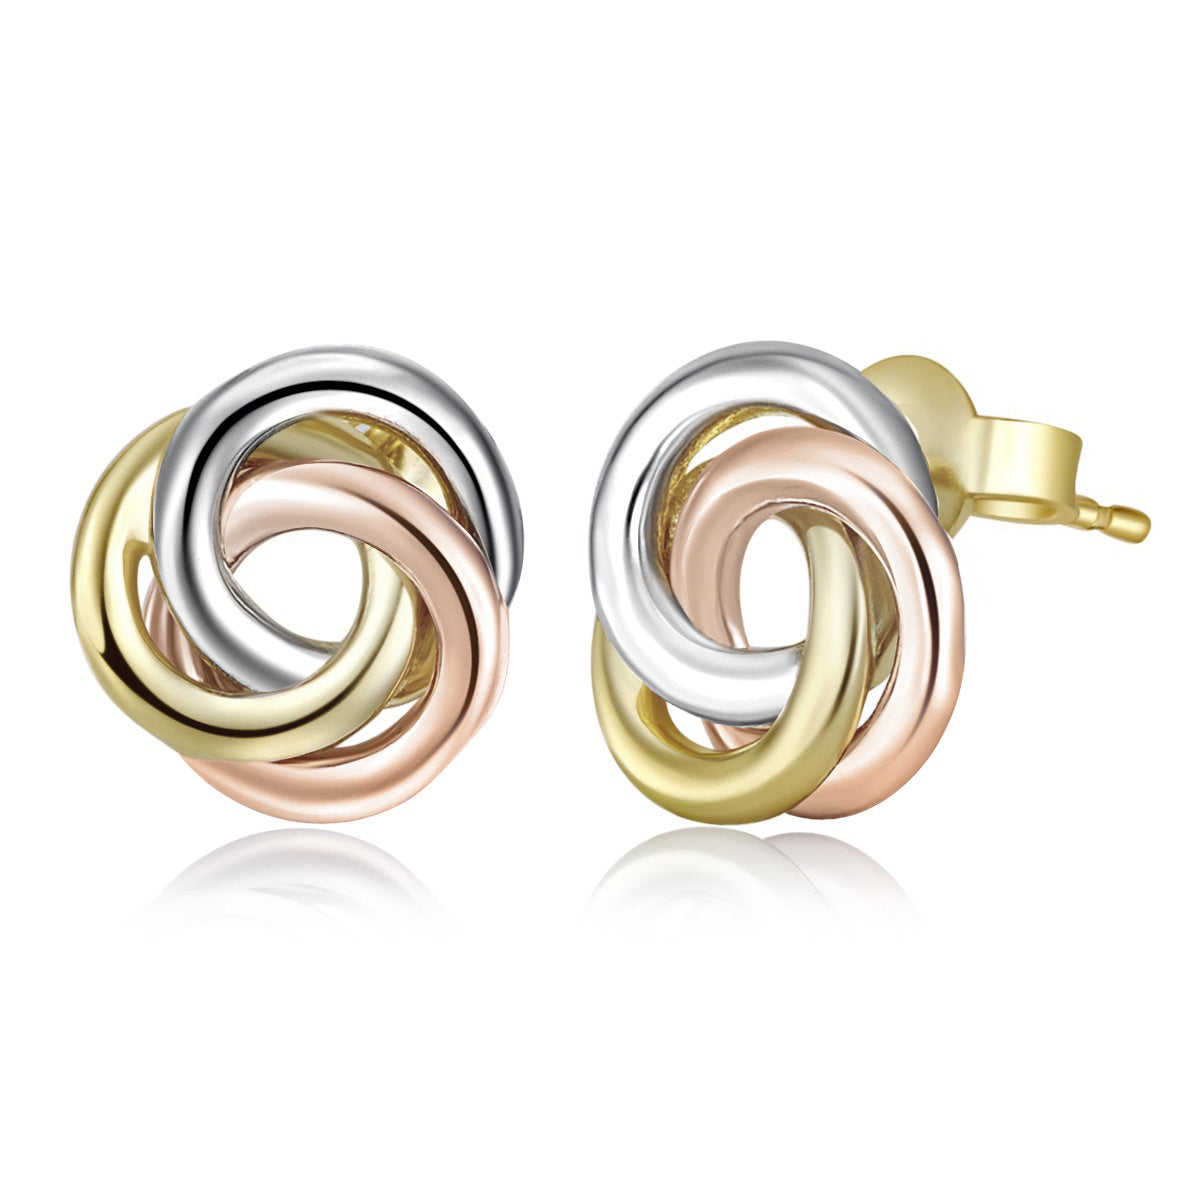 14k Tri-tone Gold 3-Ring Knot Earring Studs